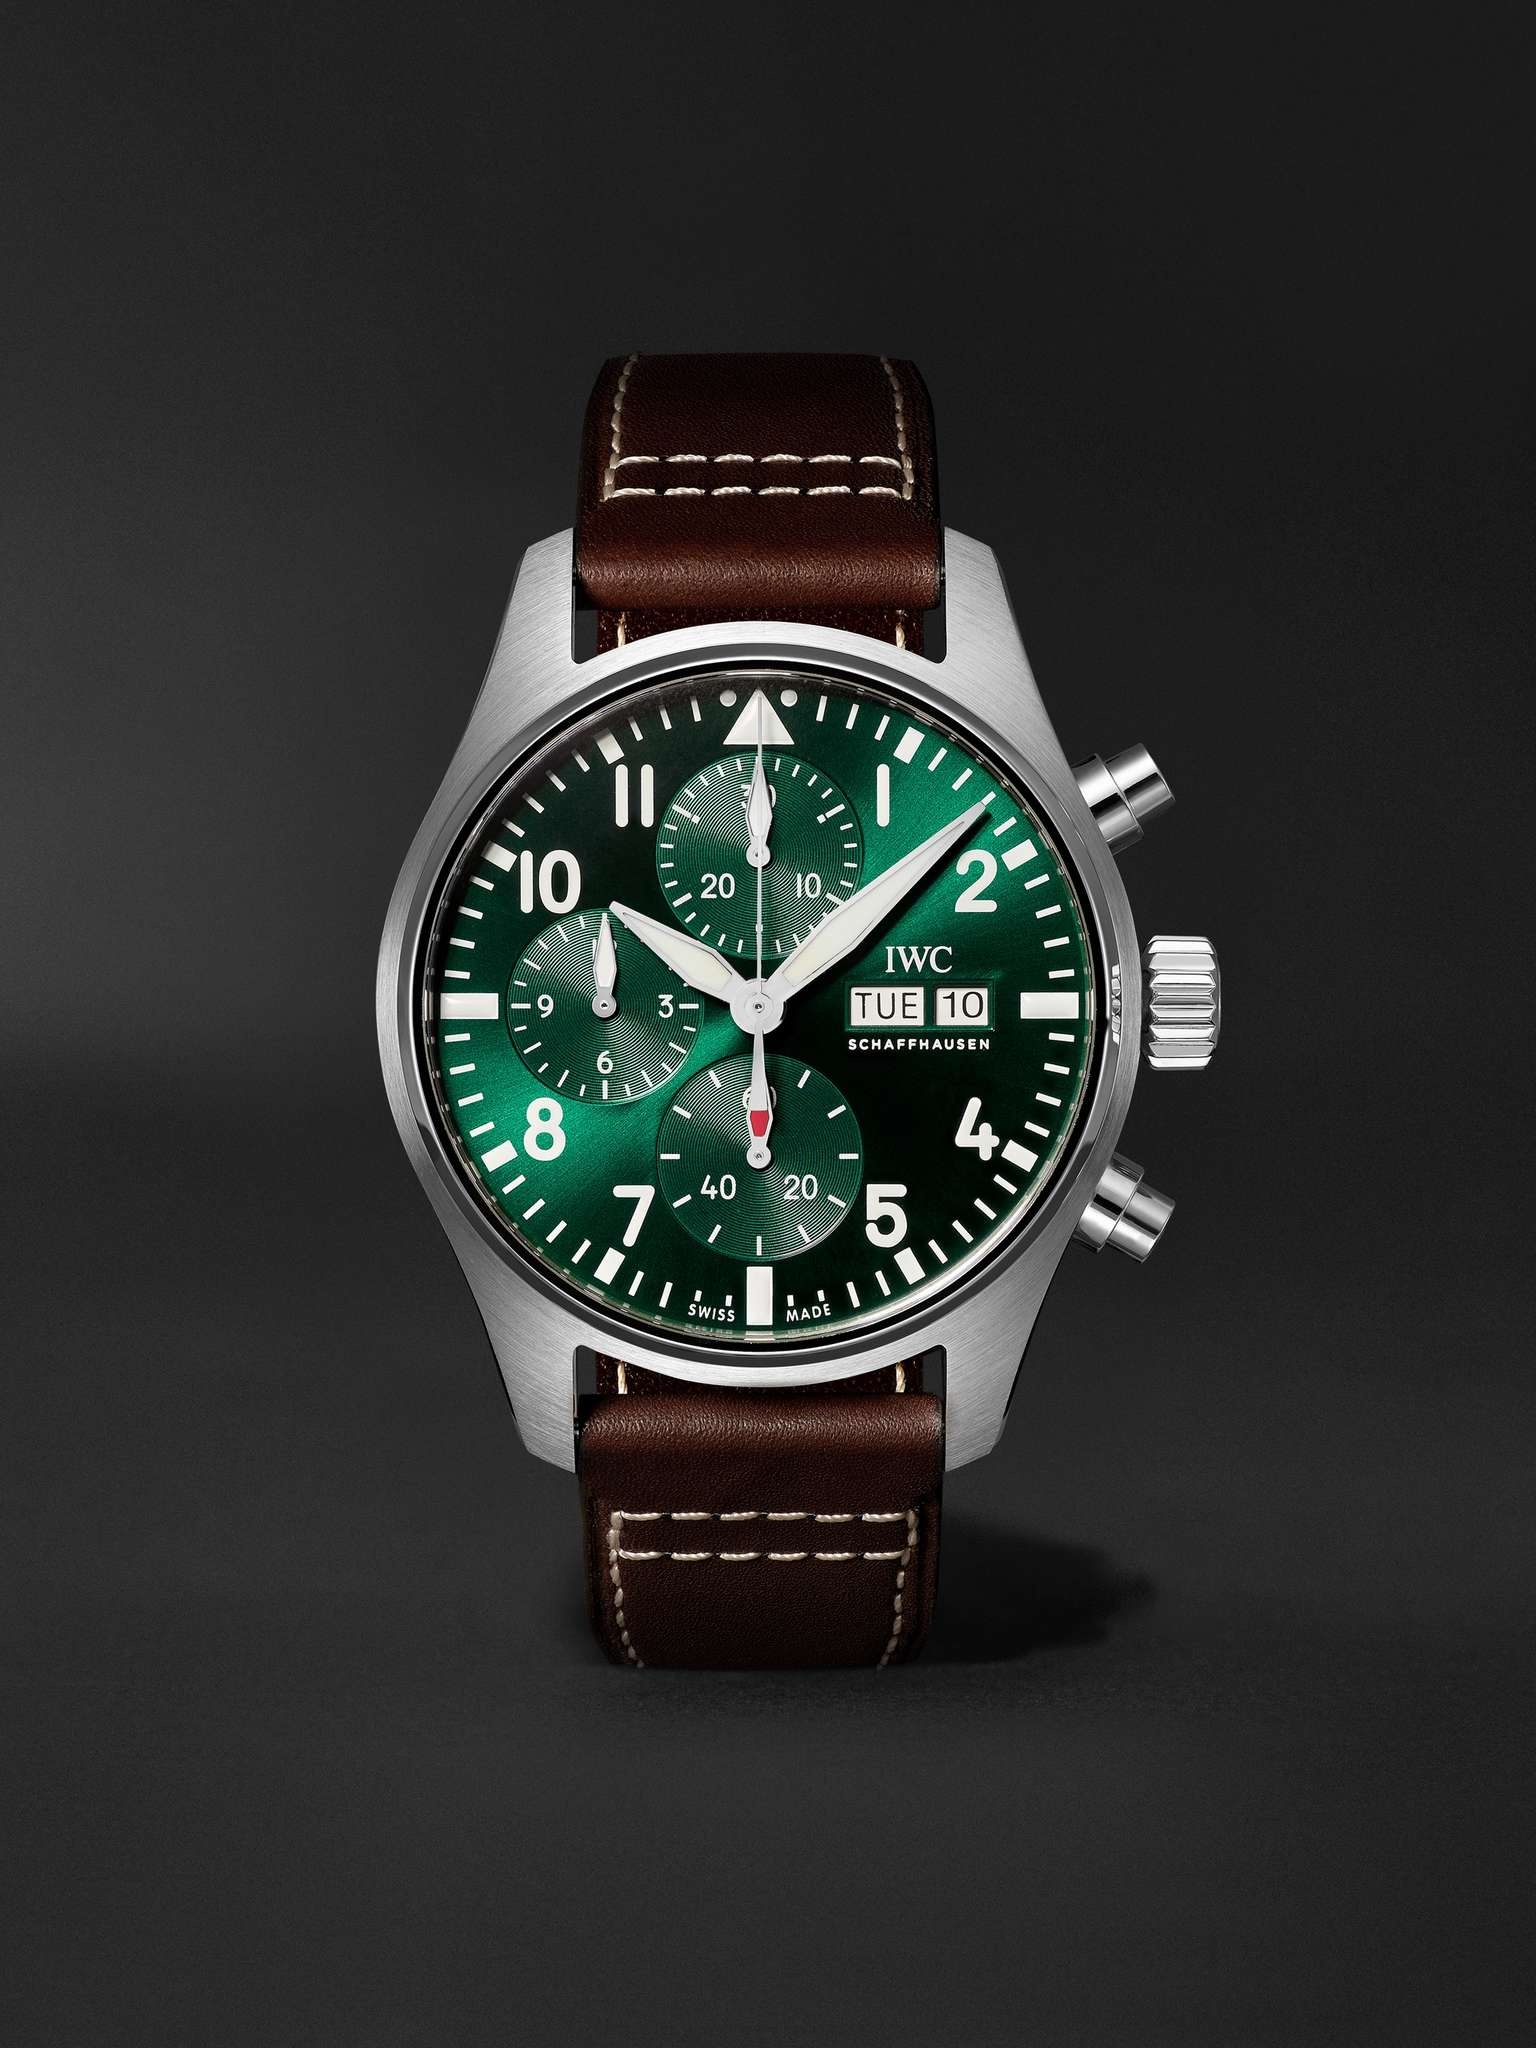 Pilot's Automatic Chronograph 41mm Stainless Steel and Leather Watch, Ref. No. IW388103 - 1